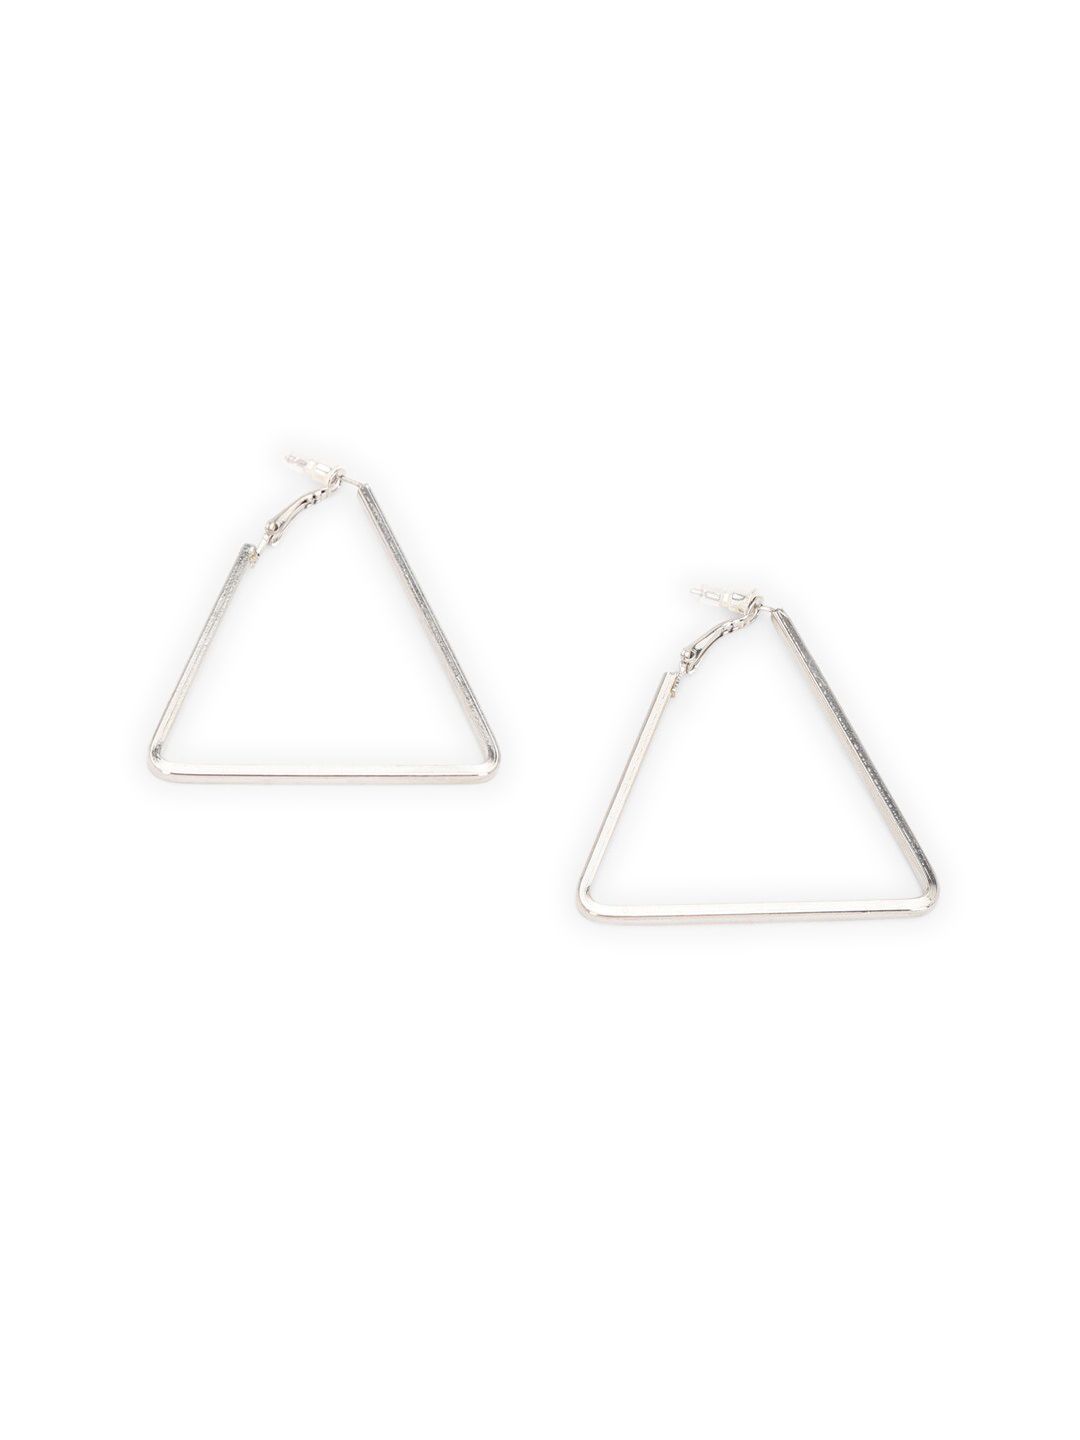 FOREVER 21 Silver-Toned Contemporary Drop Earrings Price in India